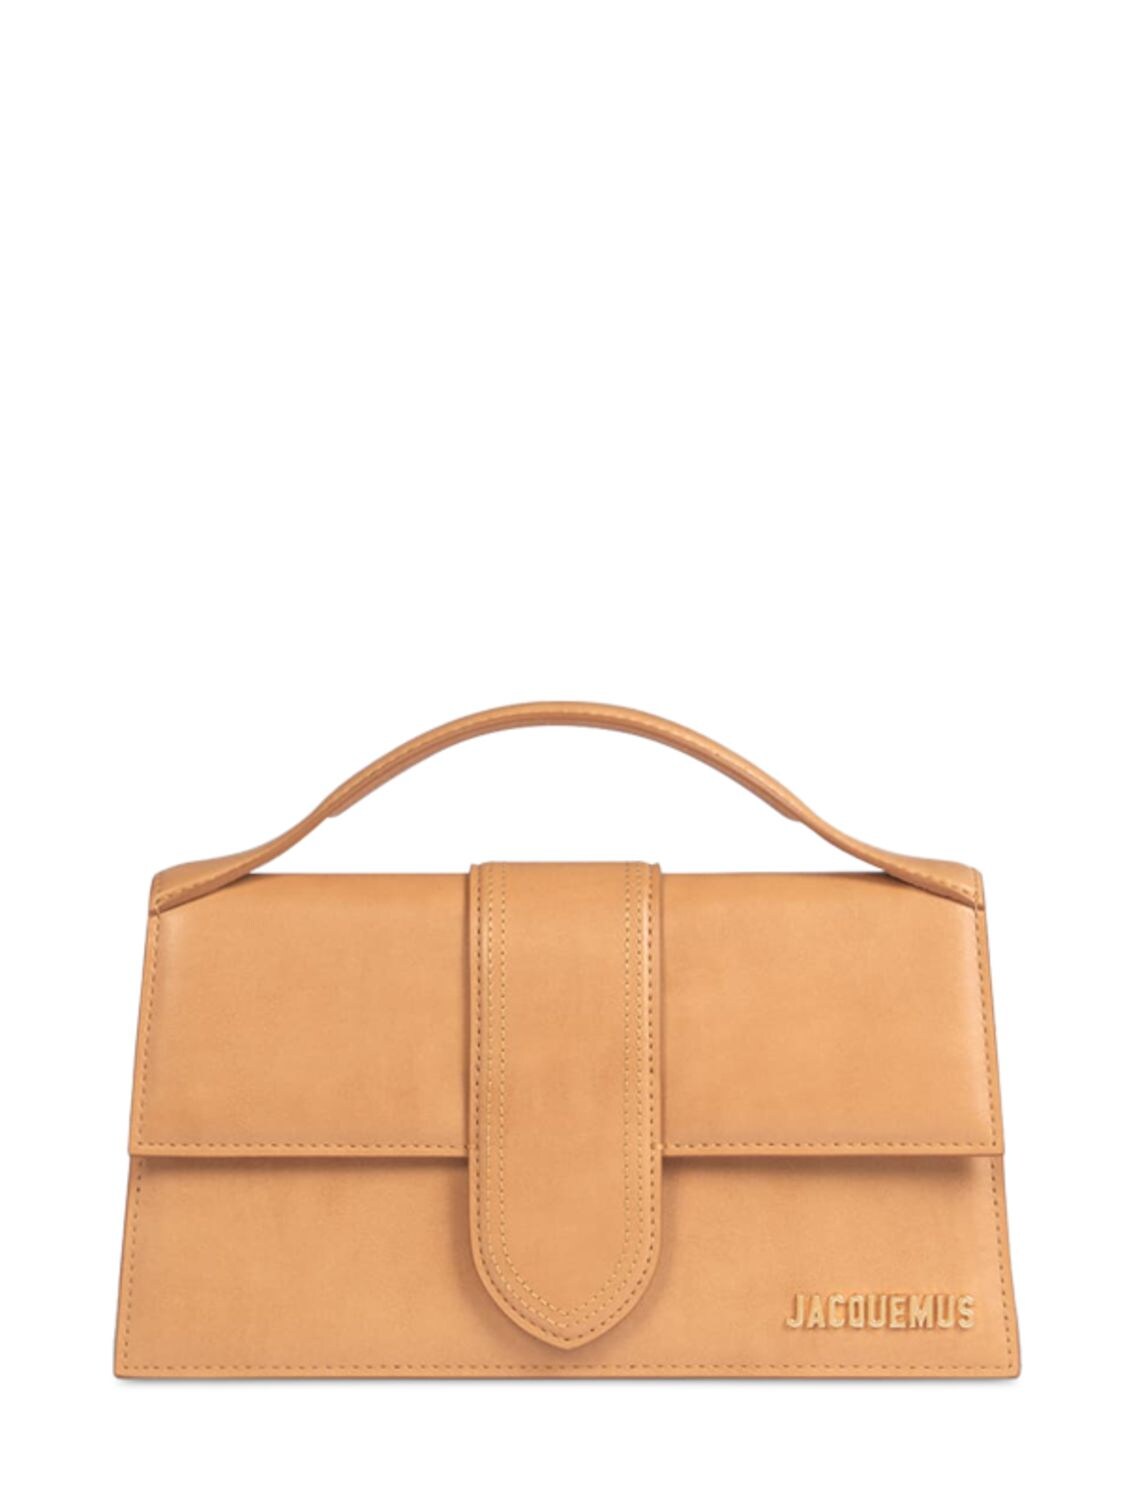 Jacquemus Le Grand Bambino Leather Top Handle Bag In Бежевый 